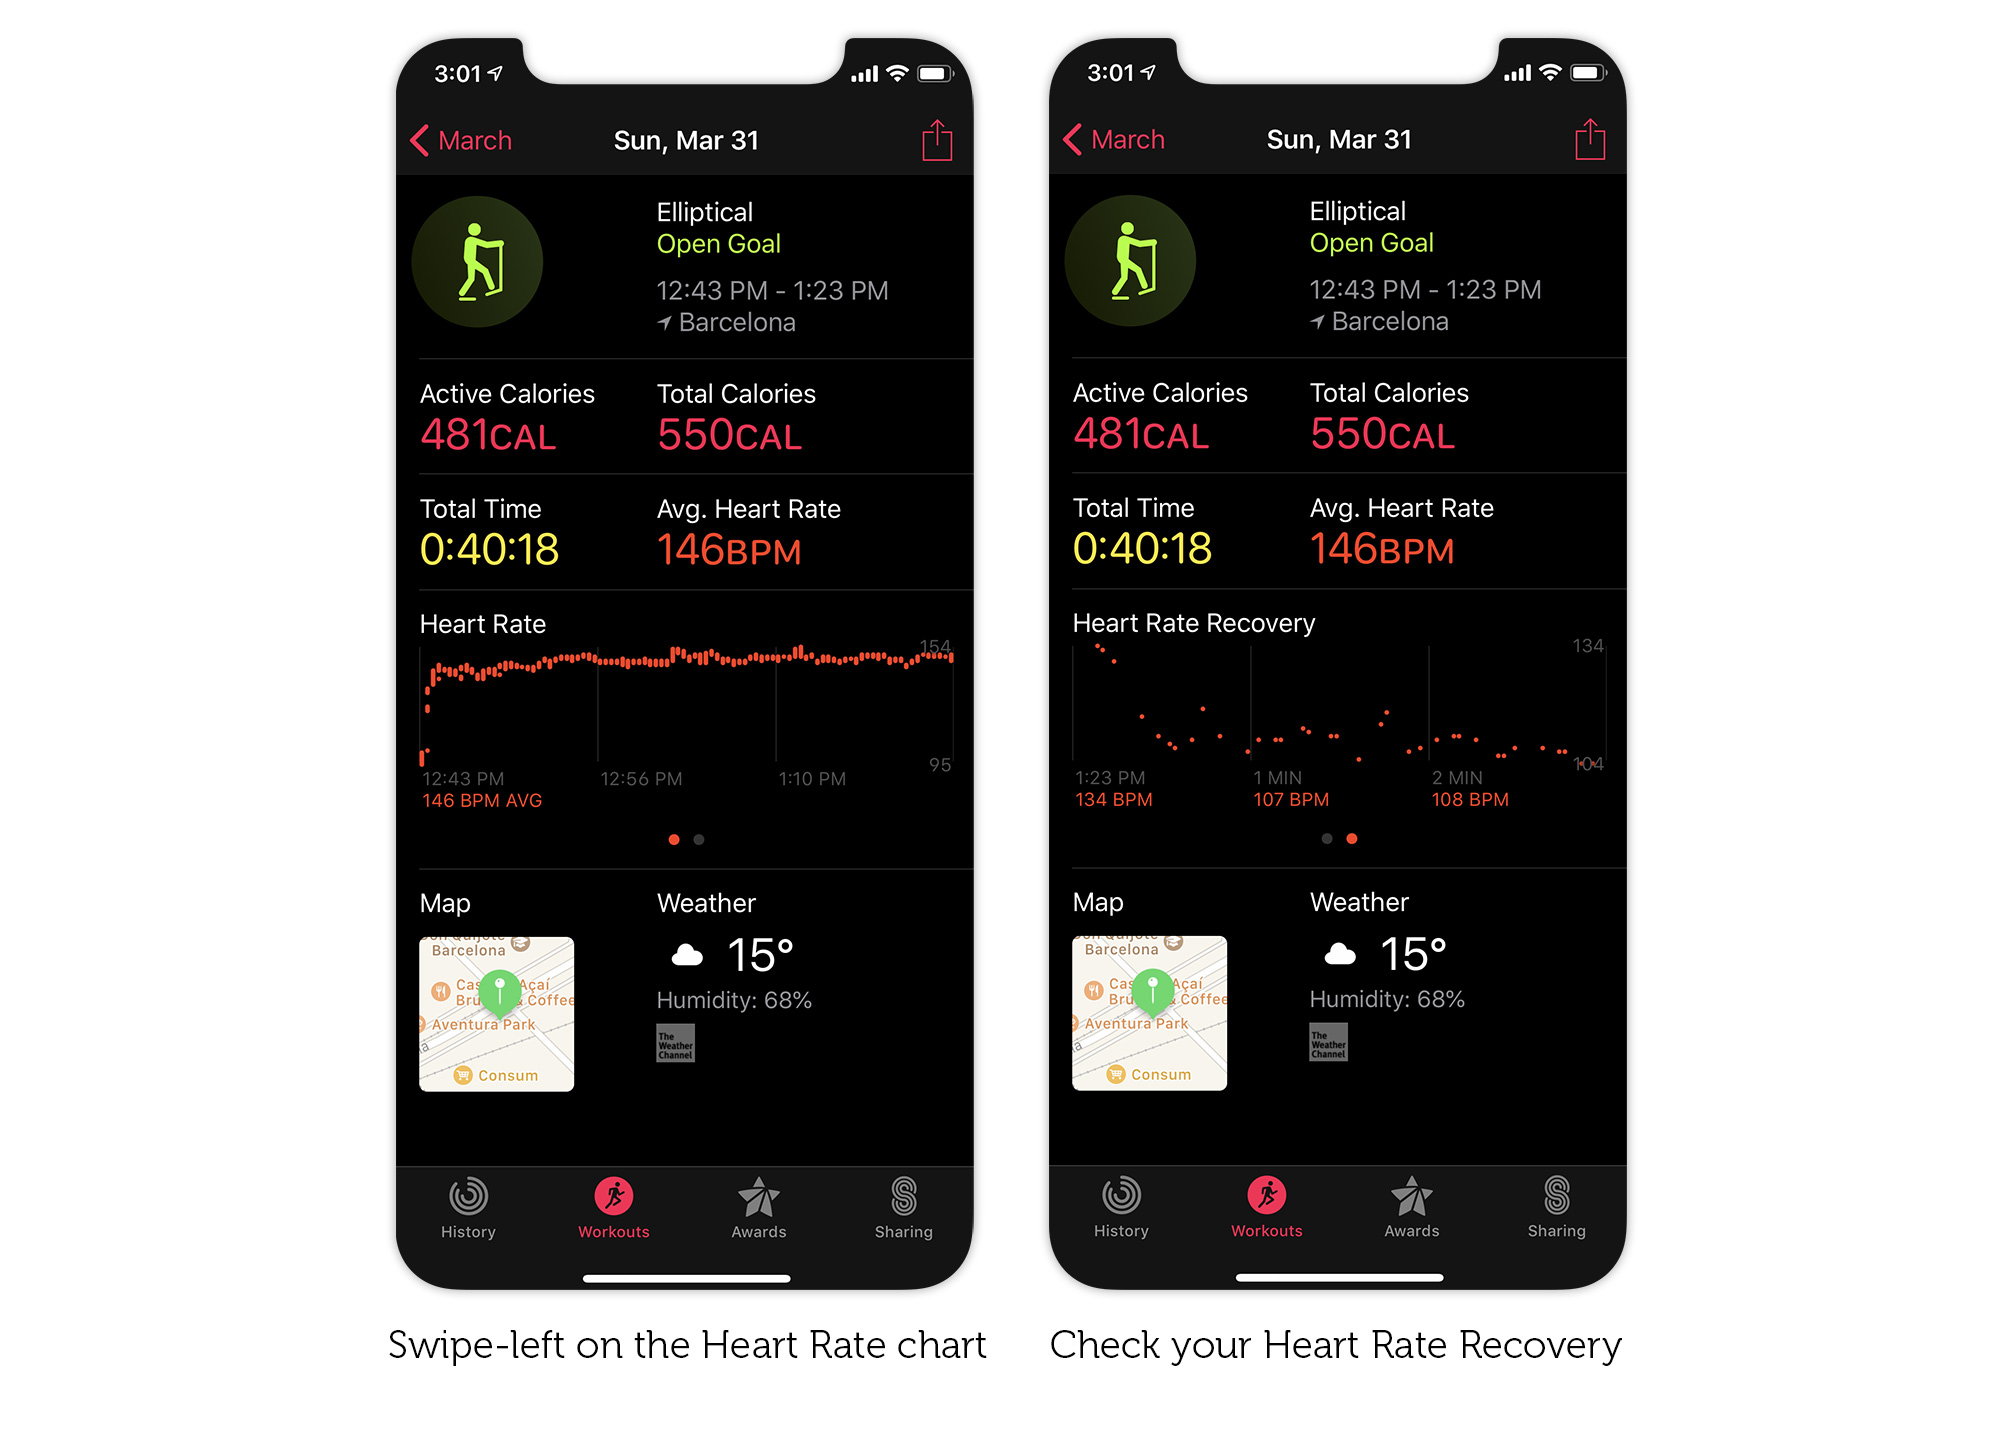 How to check your Heart Rate Recovery in the iPhone Activity app.